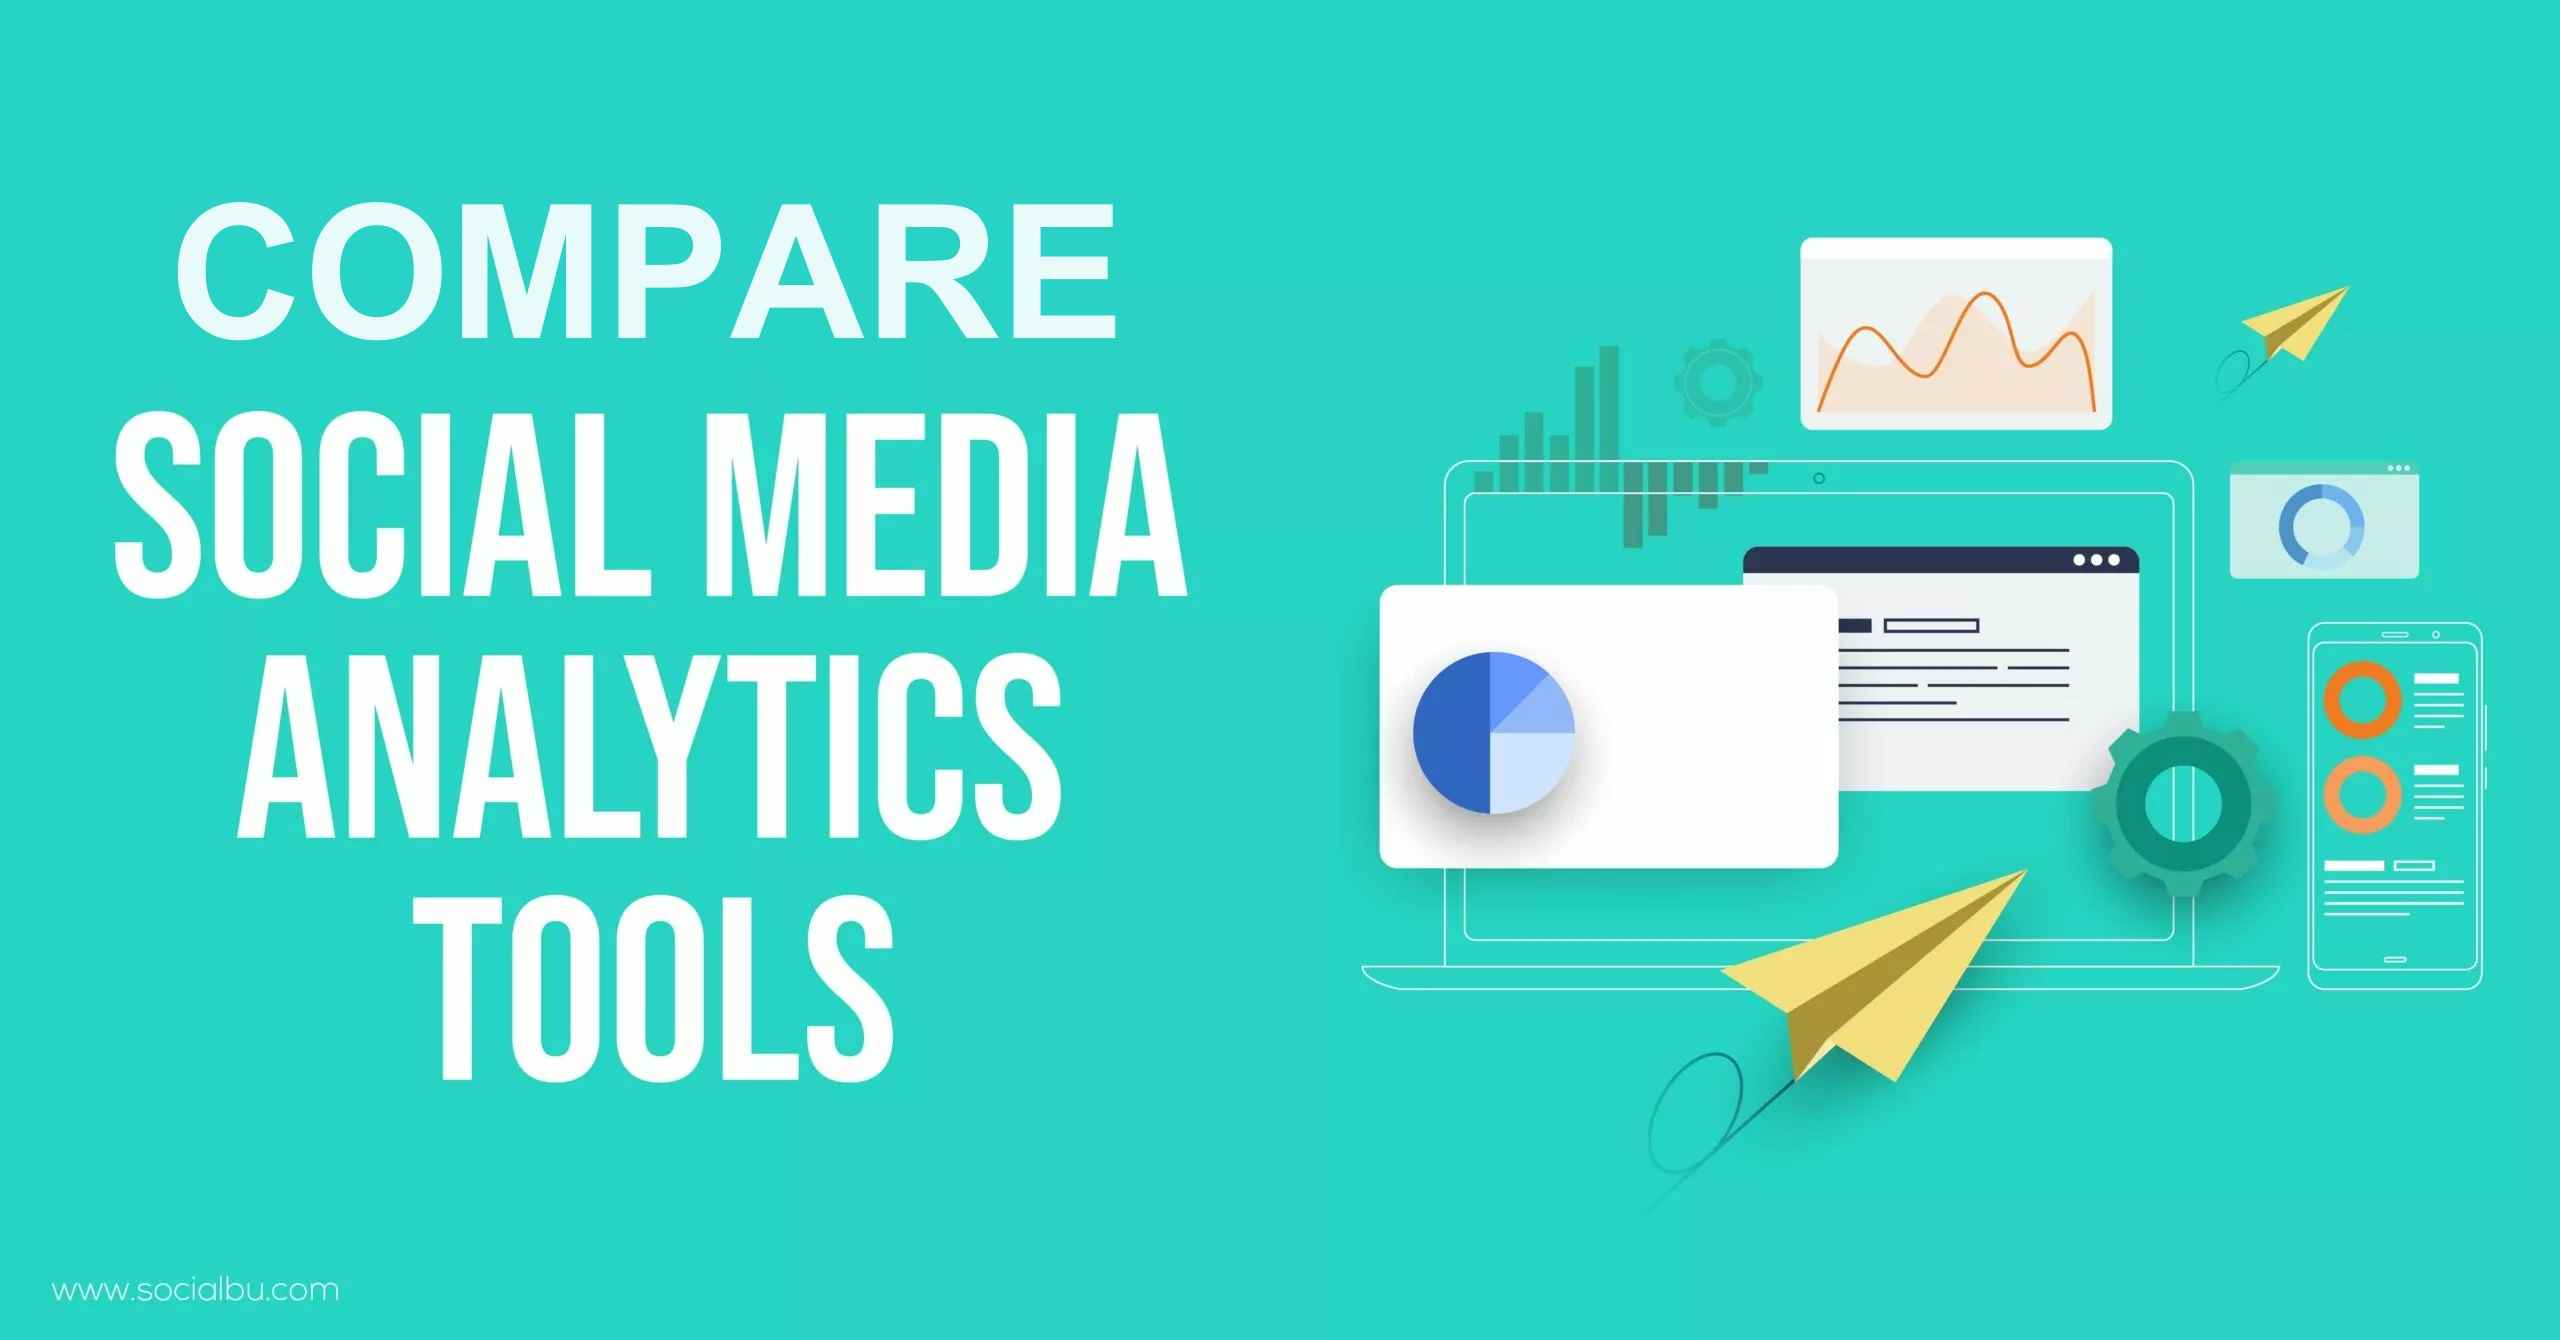 Compare Social Media Analytics Tools: Unveil the Most Impactful Metrics for Your Brand!